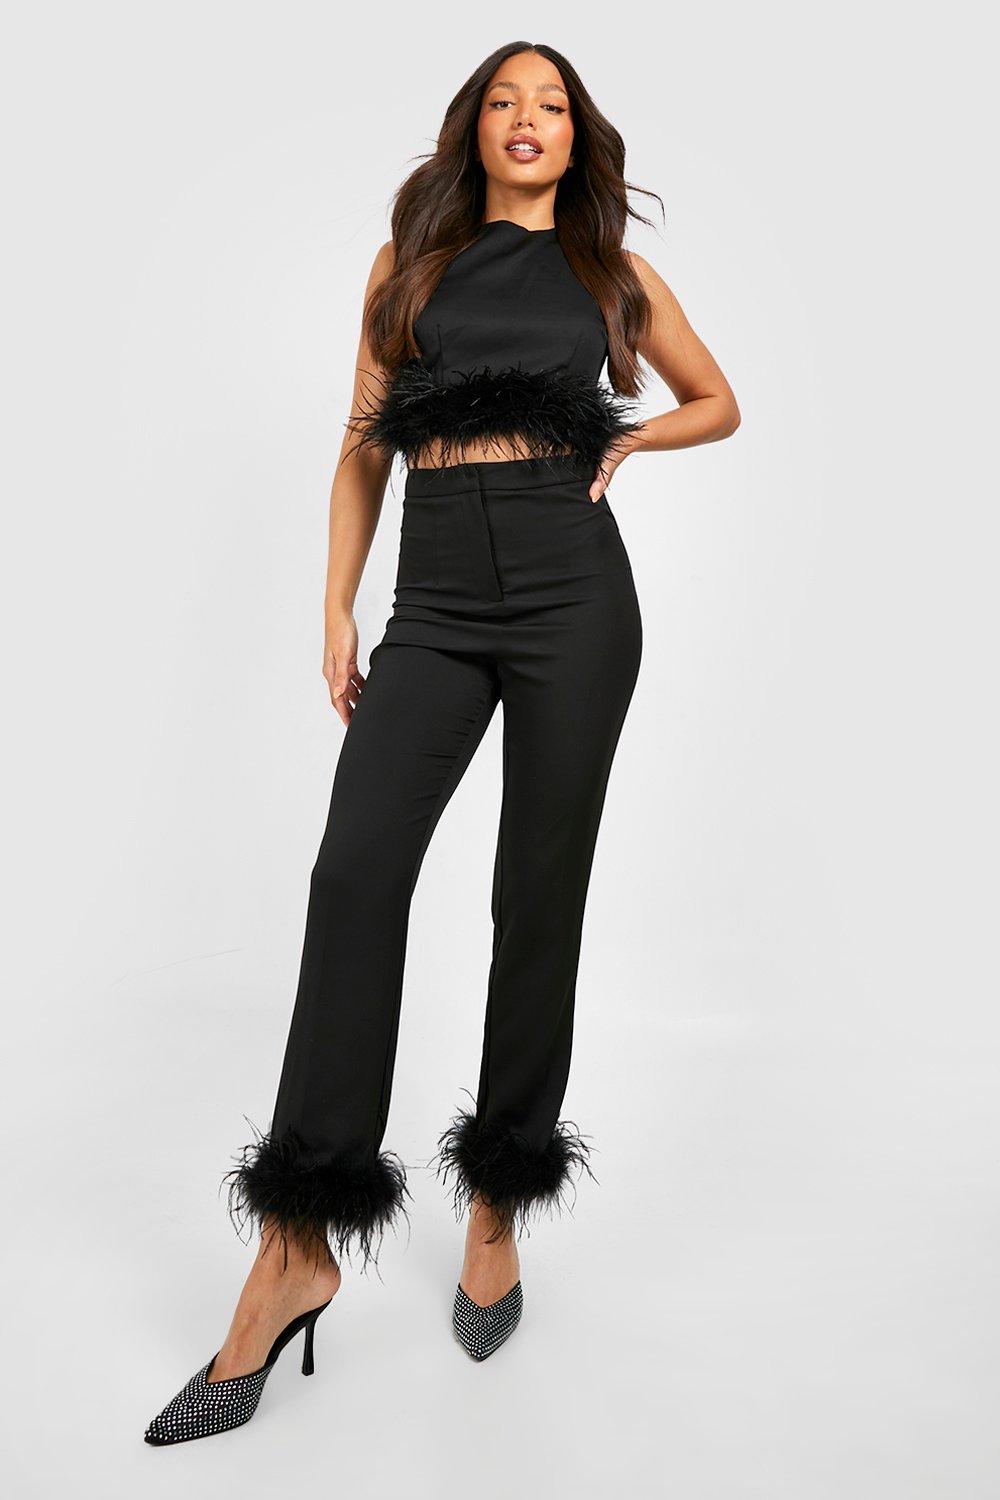 ASOS LUXE velvet tailored pants with pearl trim in black | ASOS